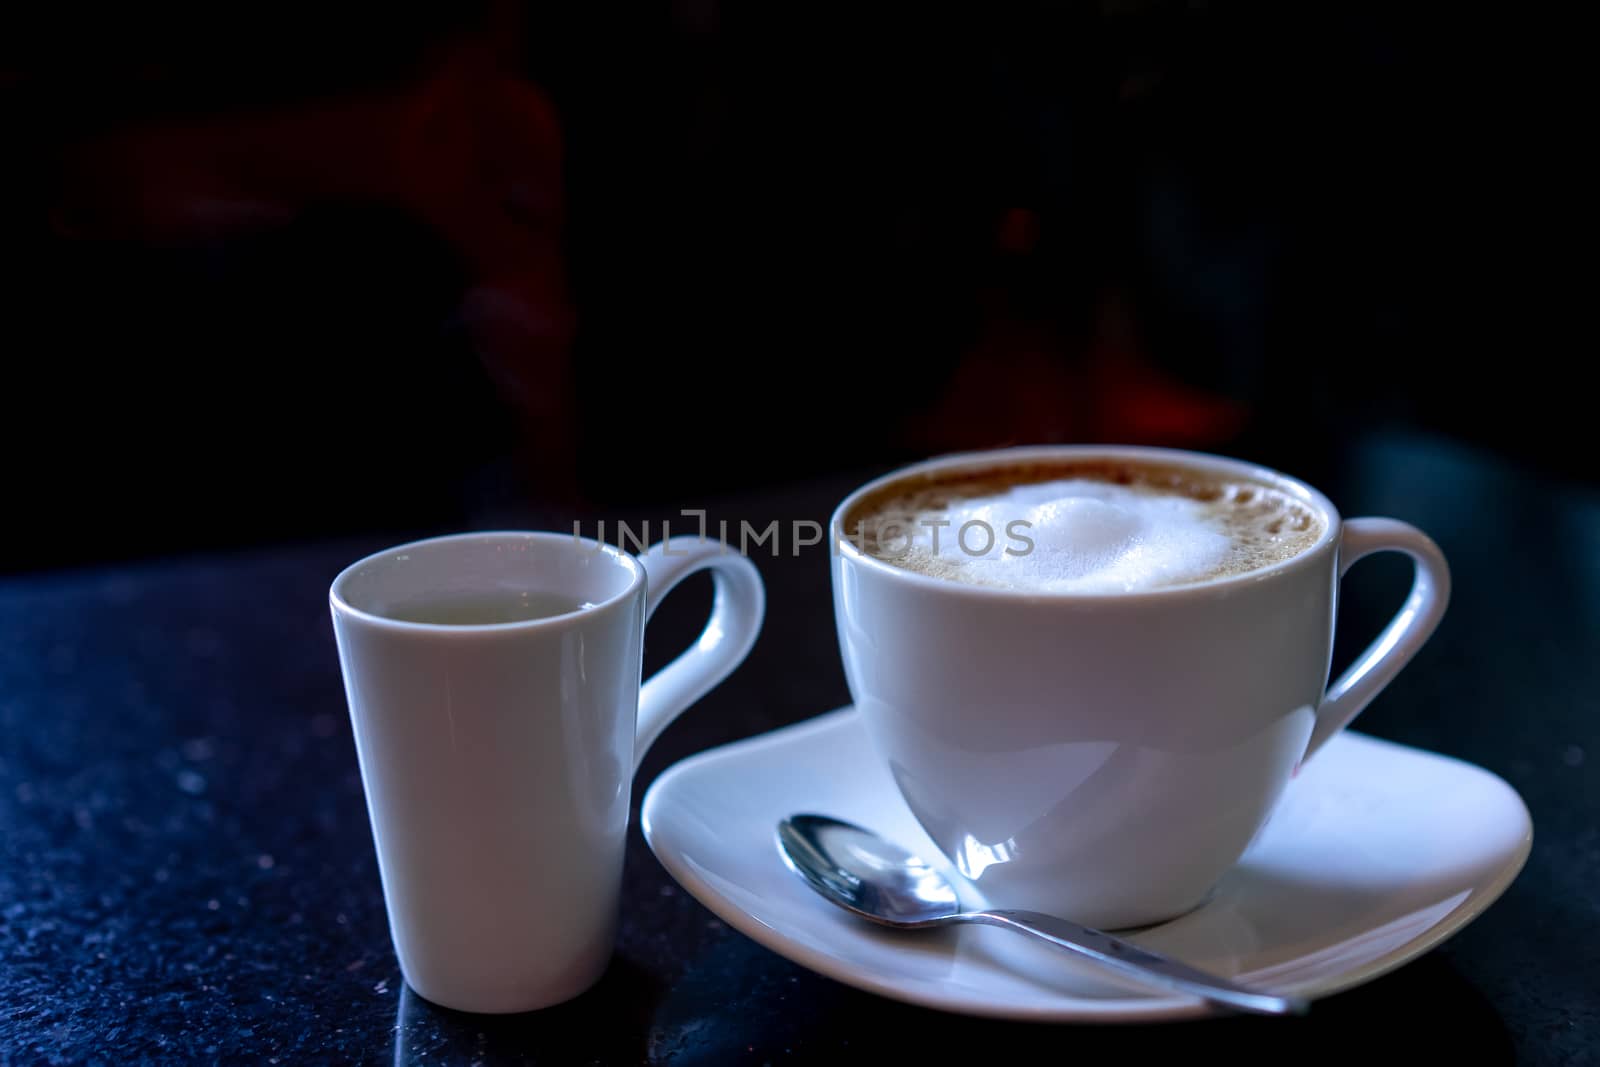 Hot drink - Coffee cup on table in morning time